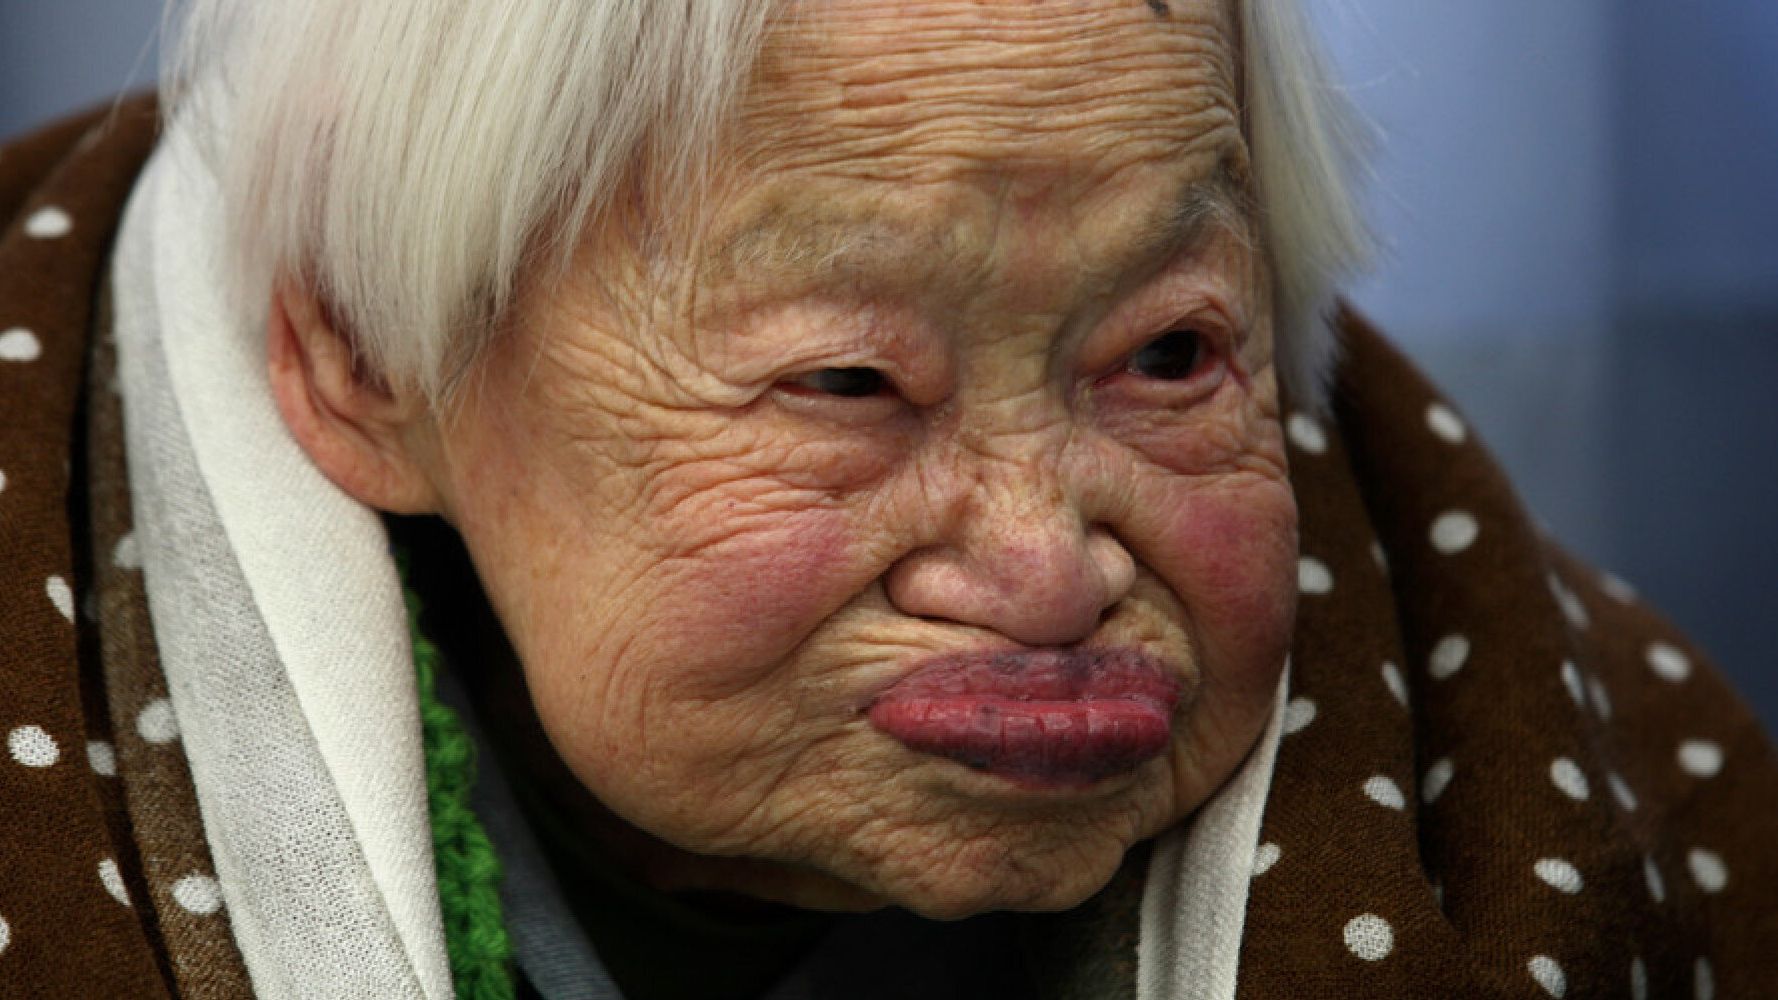 'Eat, Sleep And Relax' World's Oldest Person Shares Secret To